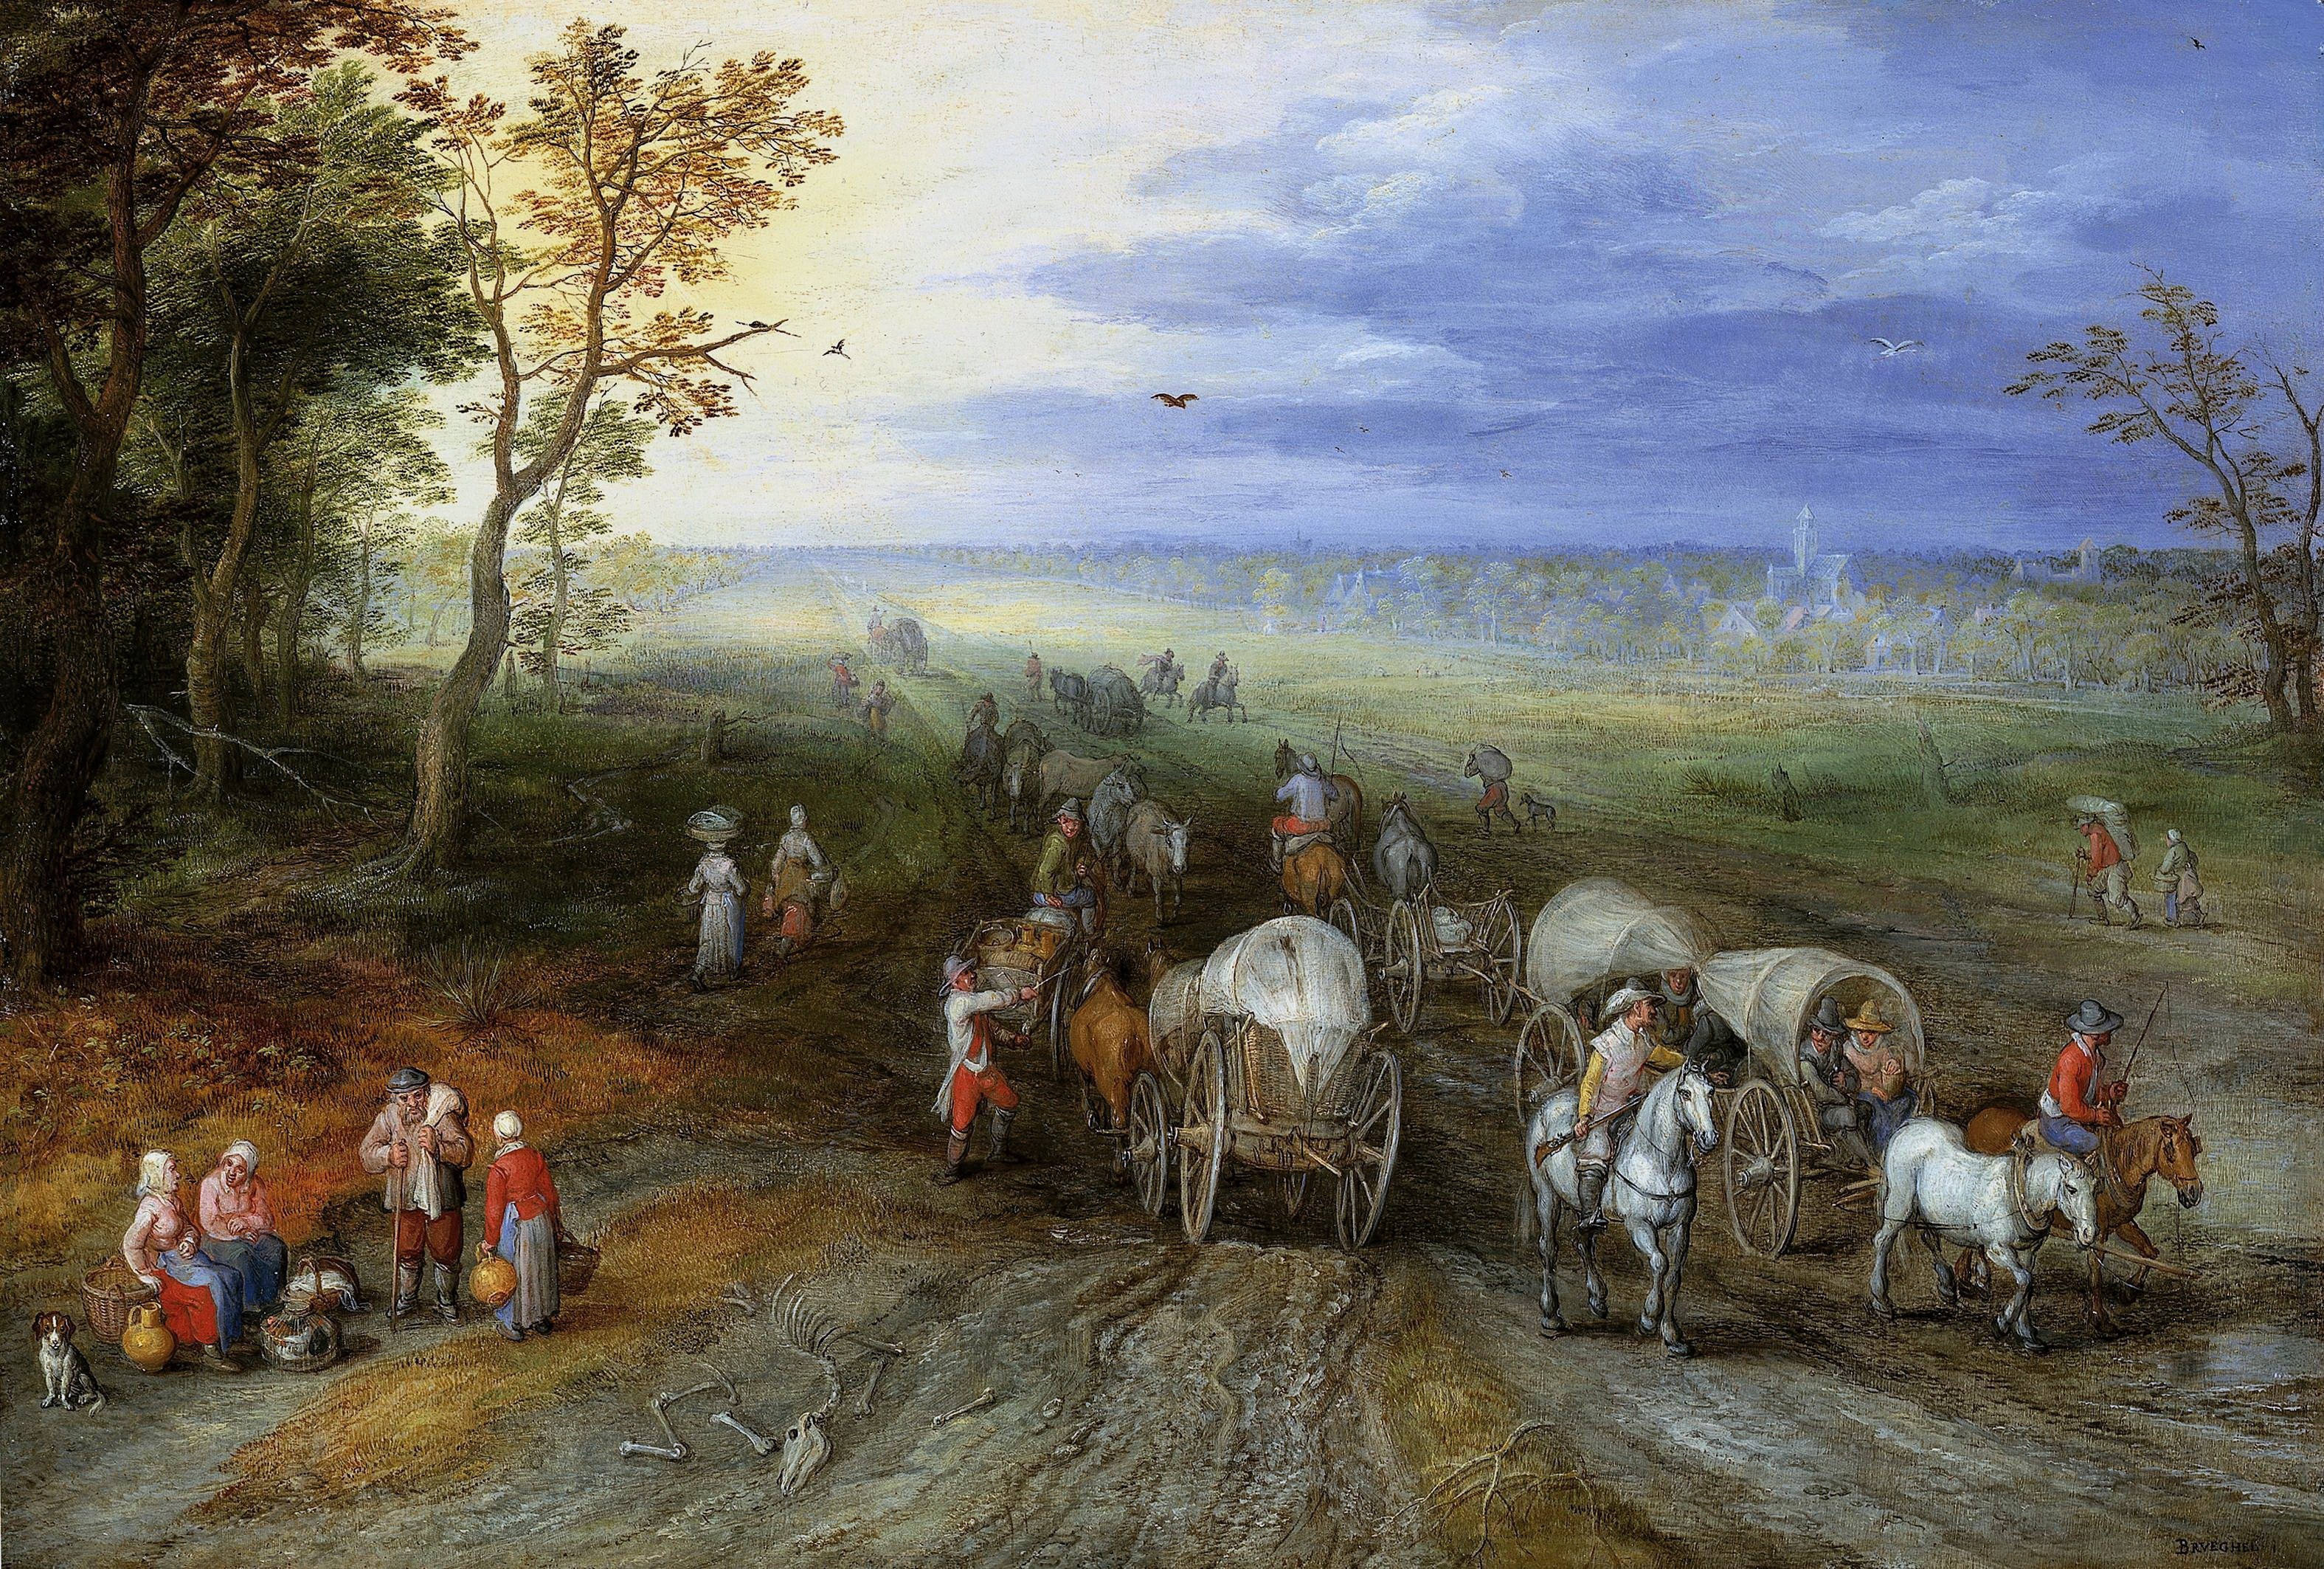 Jan-Brueghel-the-elter-1610-Landscape-with-Travellers-and-Peasants-on-a-Track-